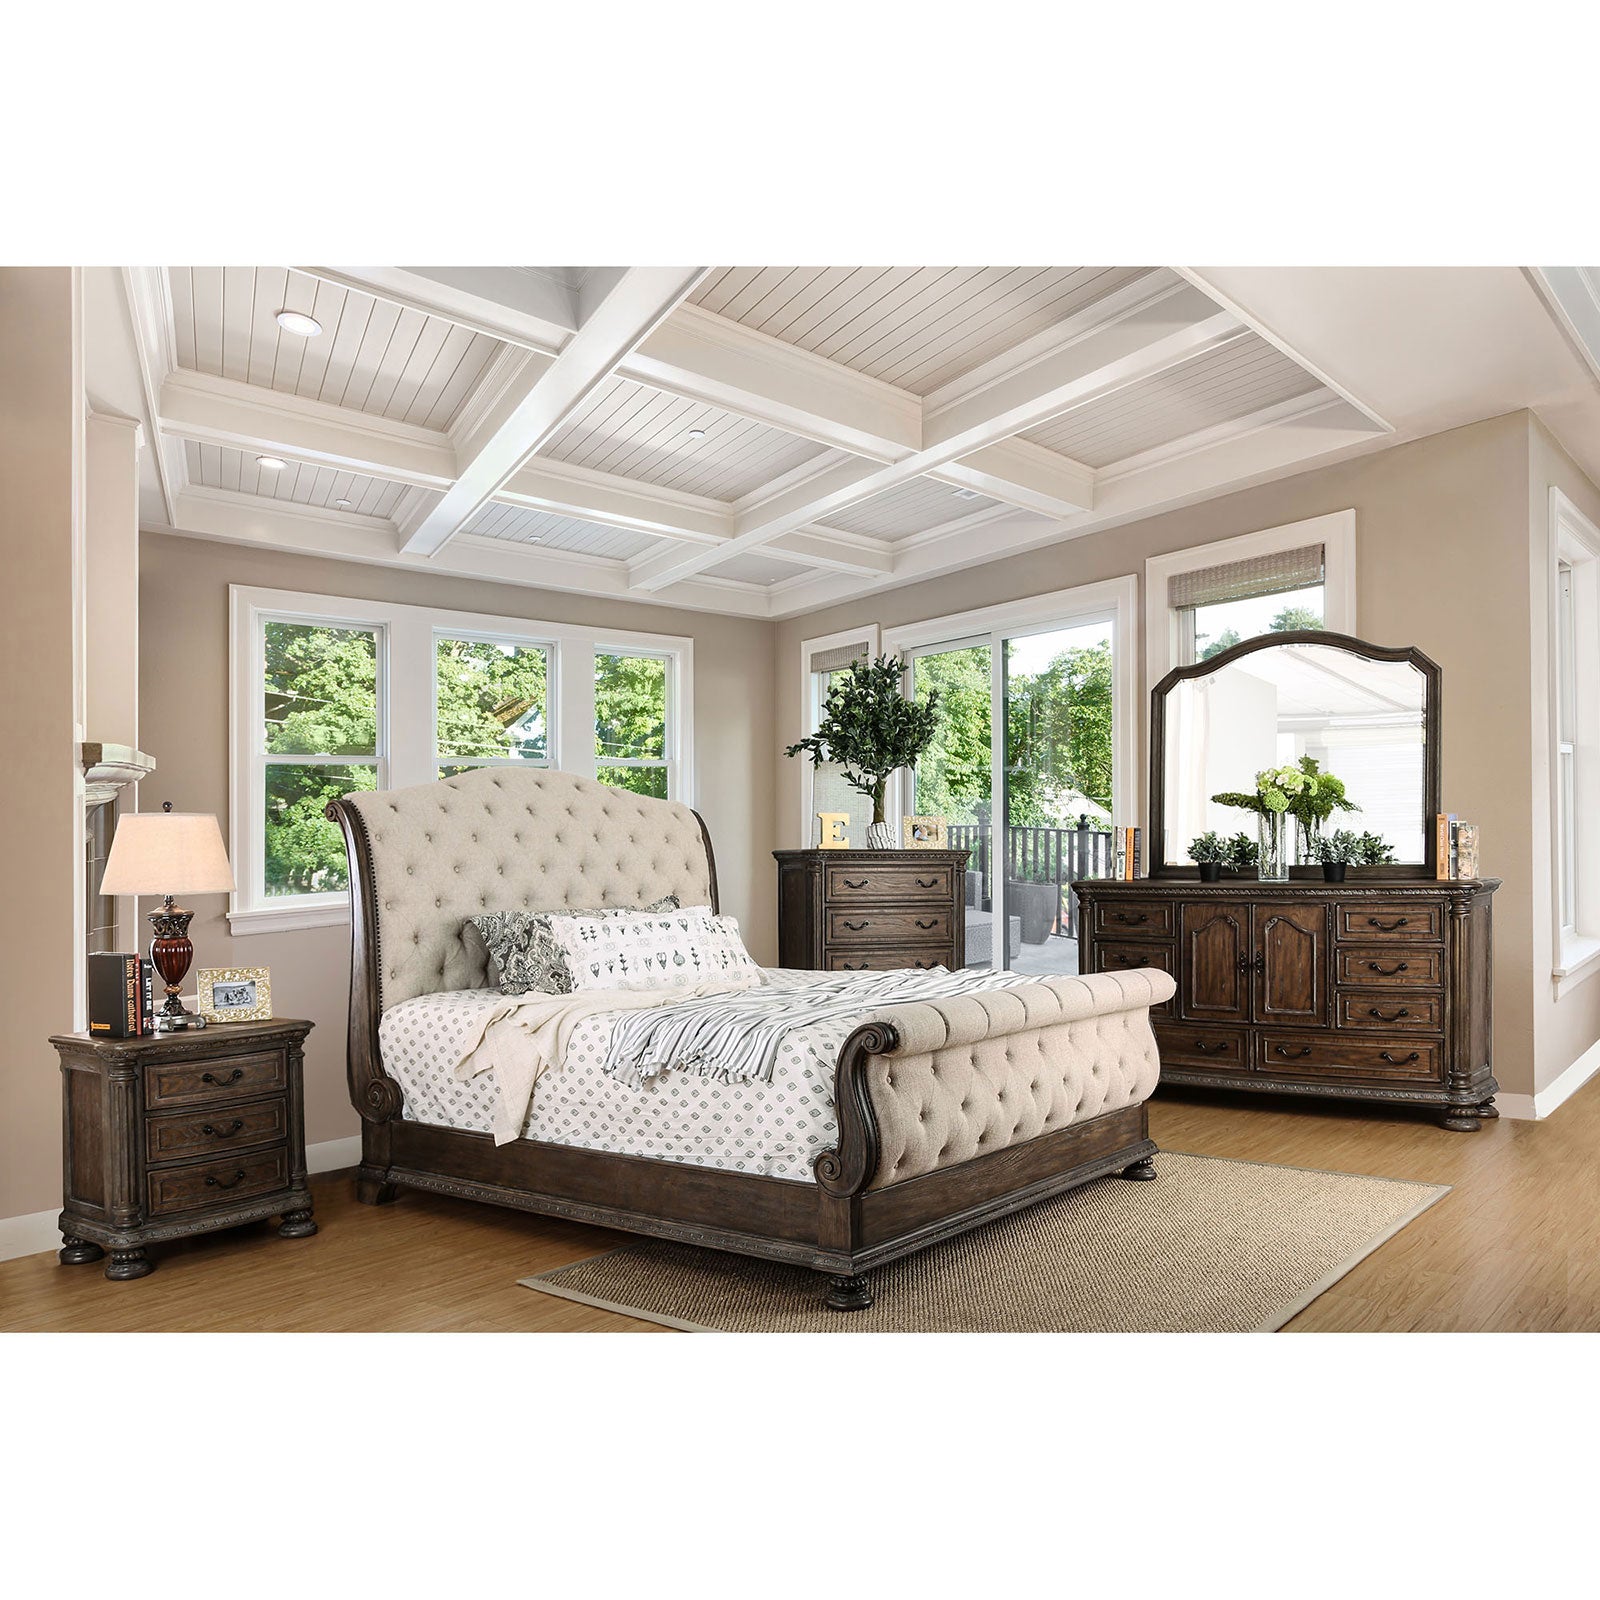 LYSANDRA Rustic Natural Tone 5 Pc. Queen Bedroom Set w/ Chest image